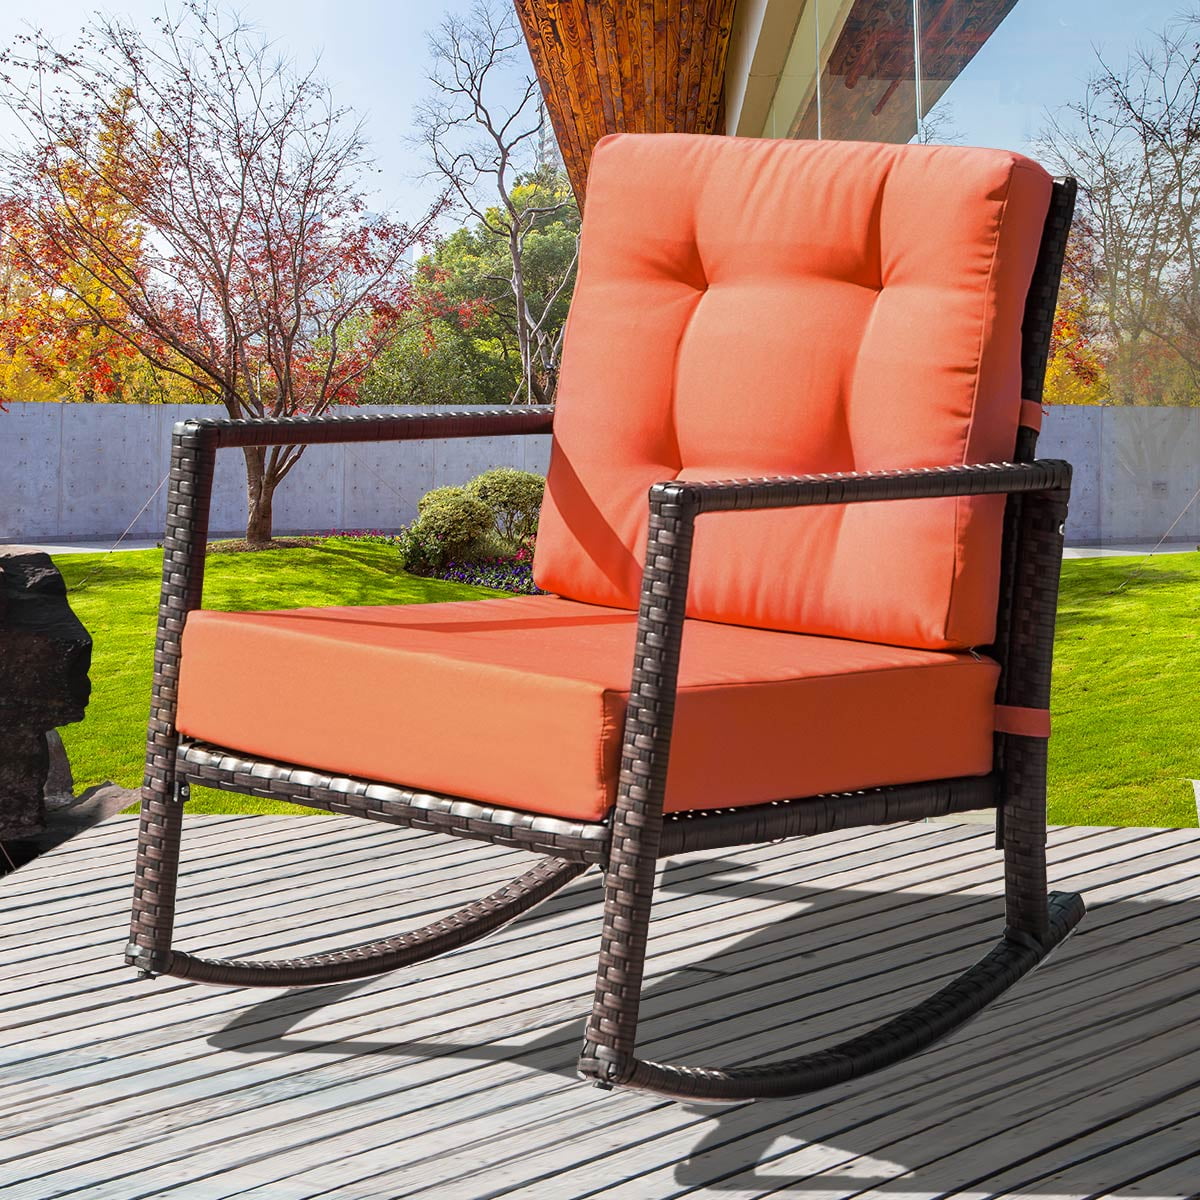 IMUsee Rocking And Swivel Patio Chairs, Pieces Outdoor Wicker Swivel